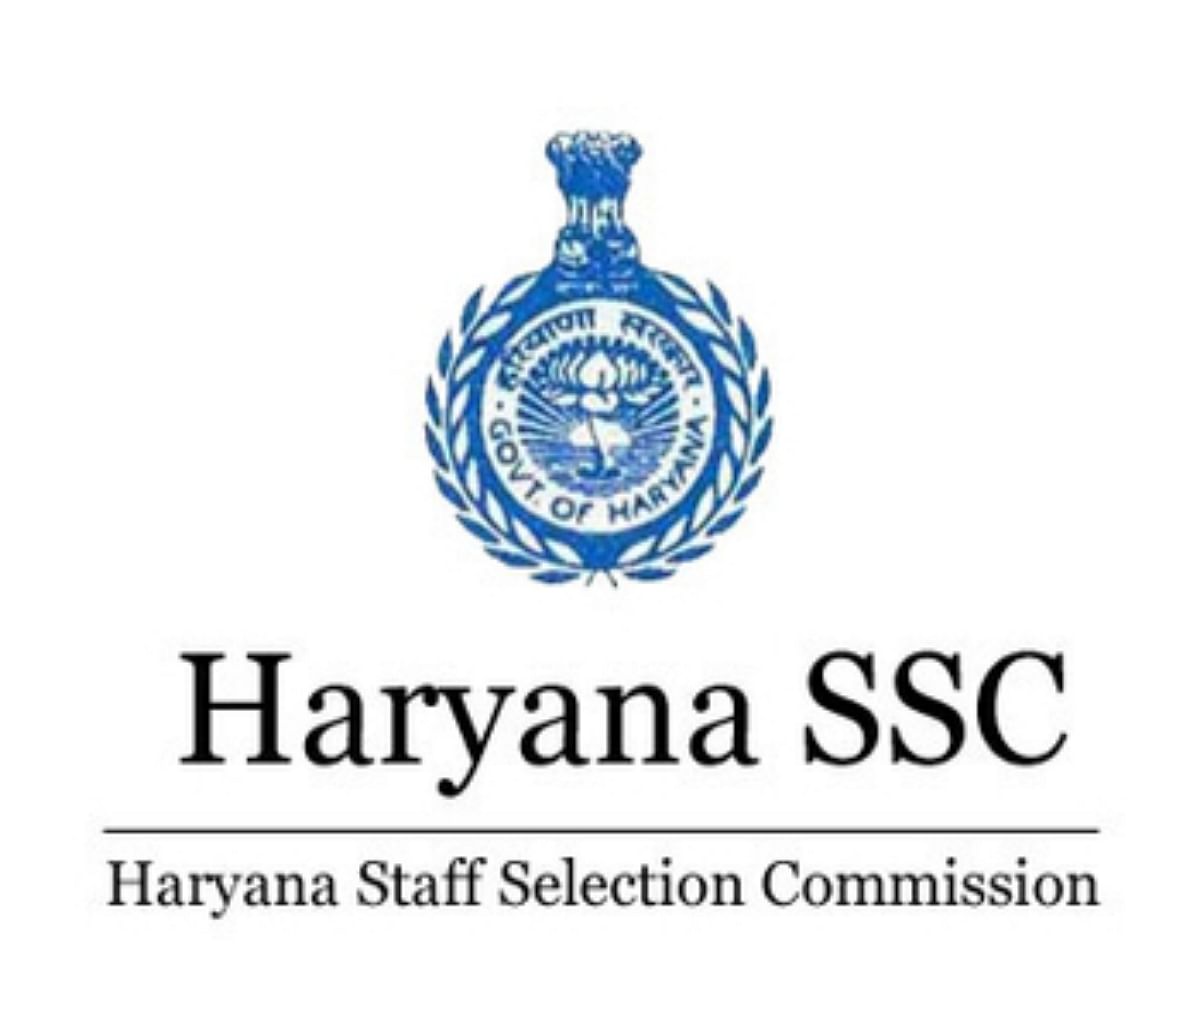 Govt Jobs for Graduates in Haryana SSC, Applications are Invited for 588 Posts till March 22